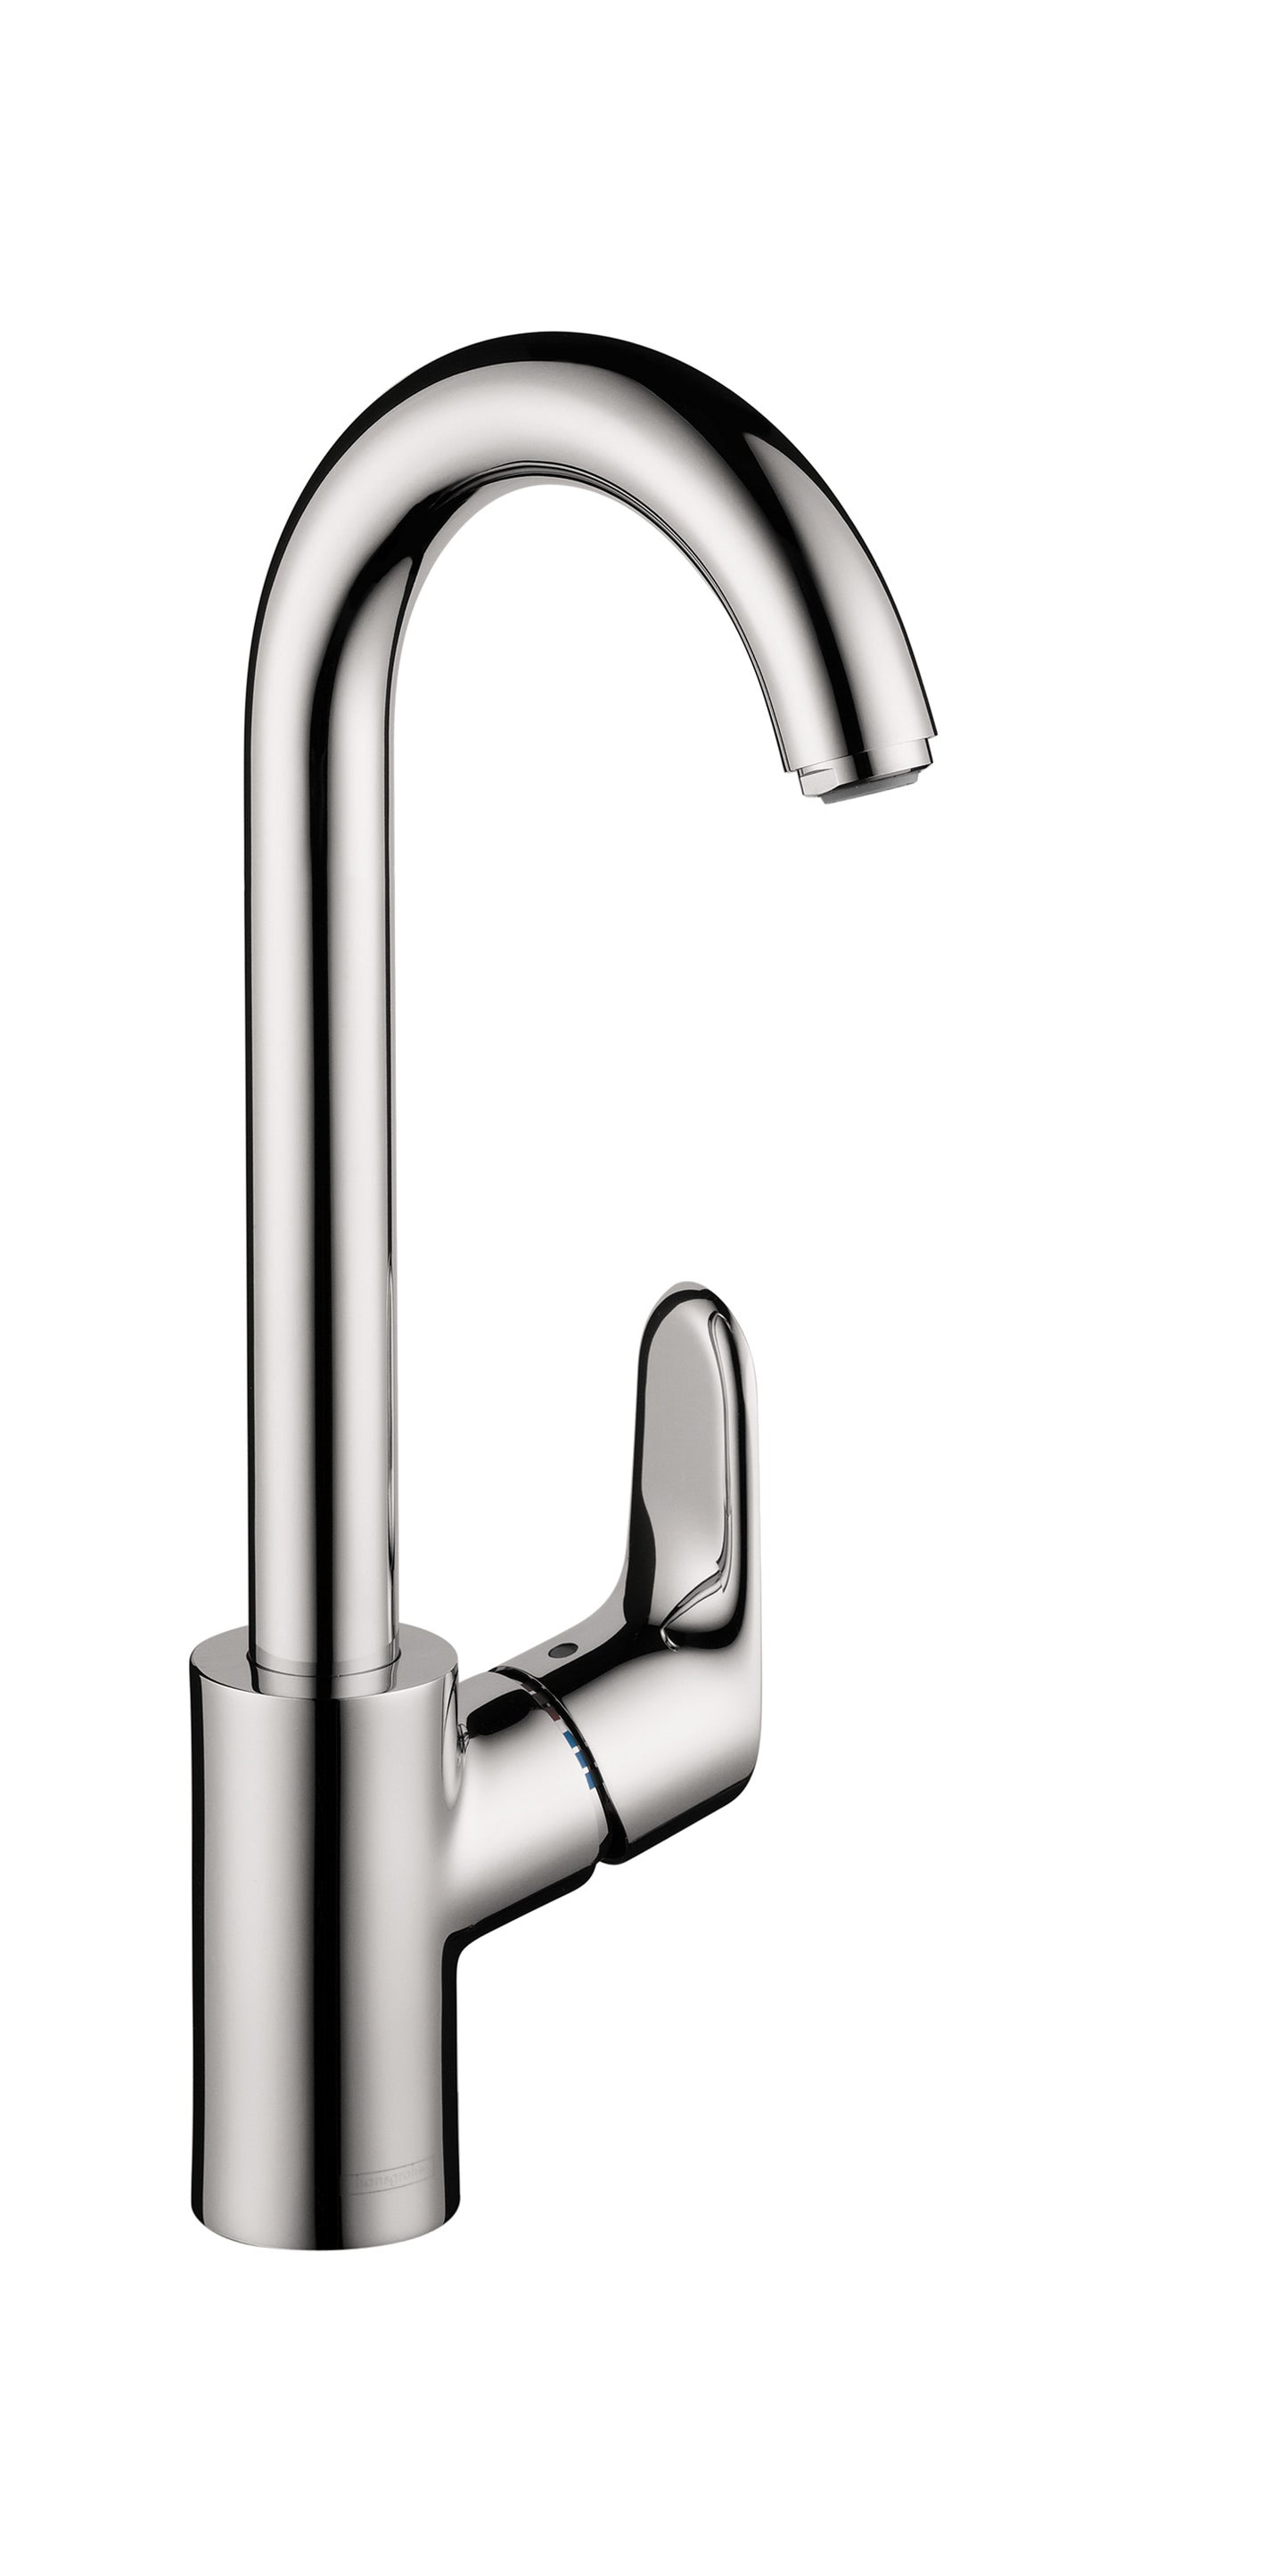 HANSGROHE 04507001 Chrome Focus Modern Kitchen Faucet 1.5 GPM